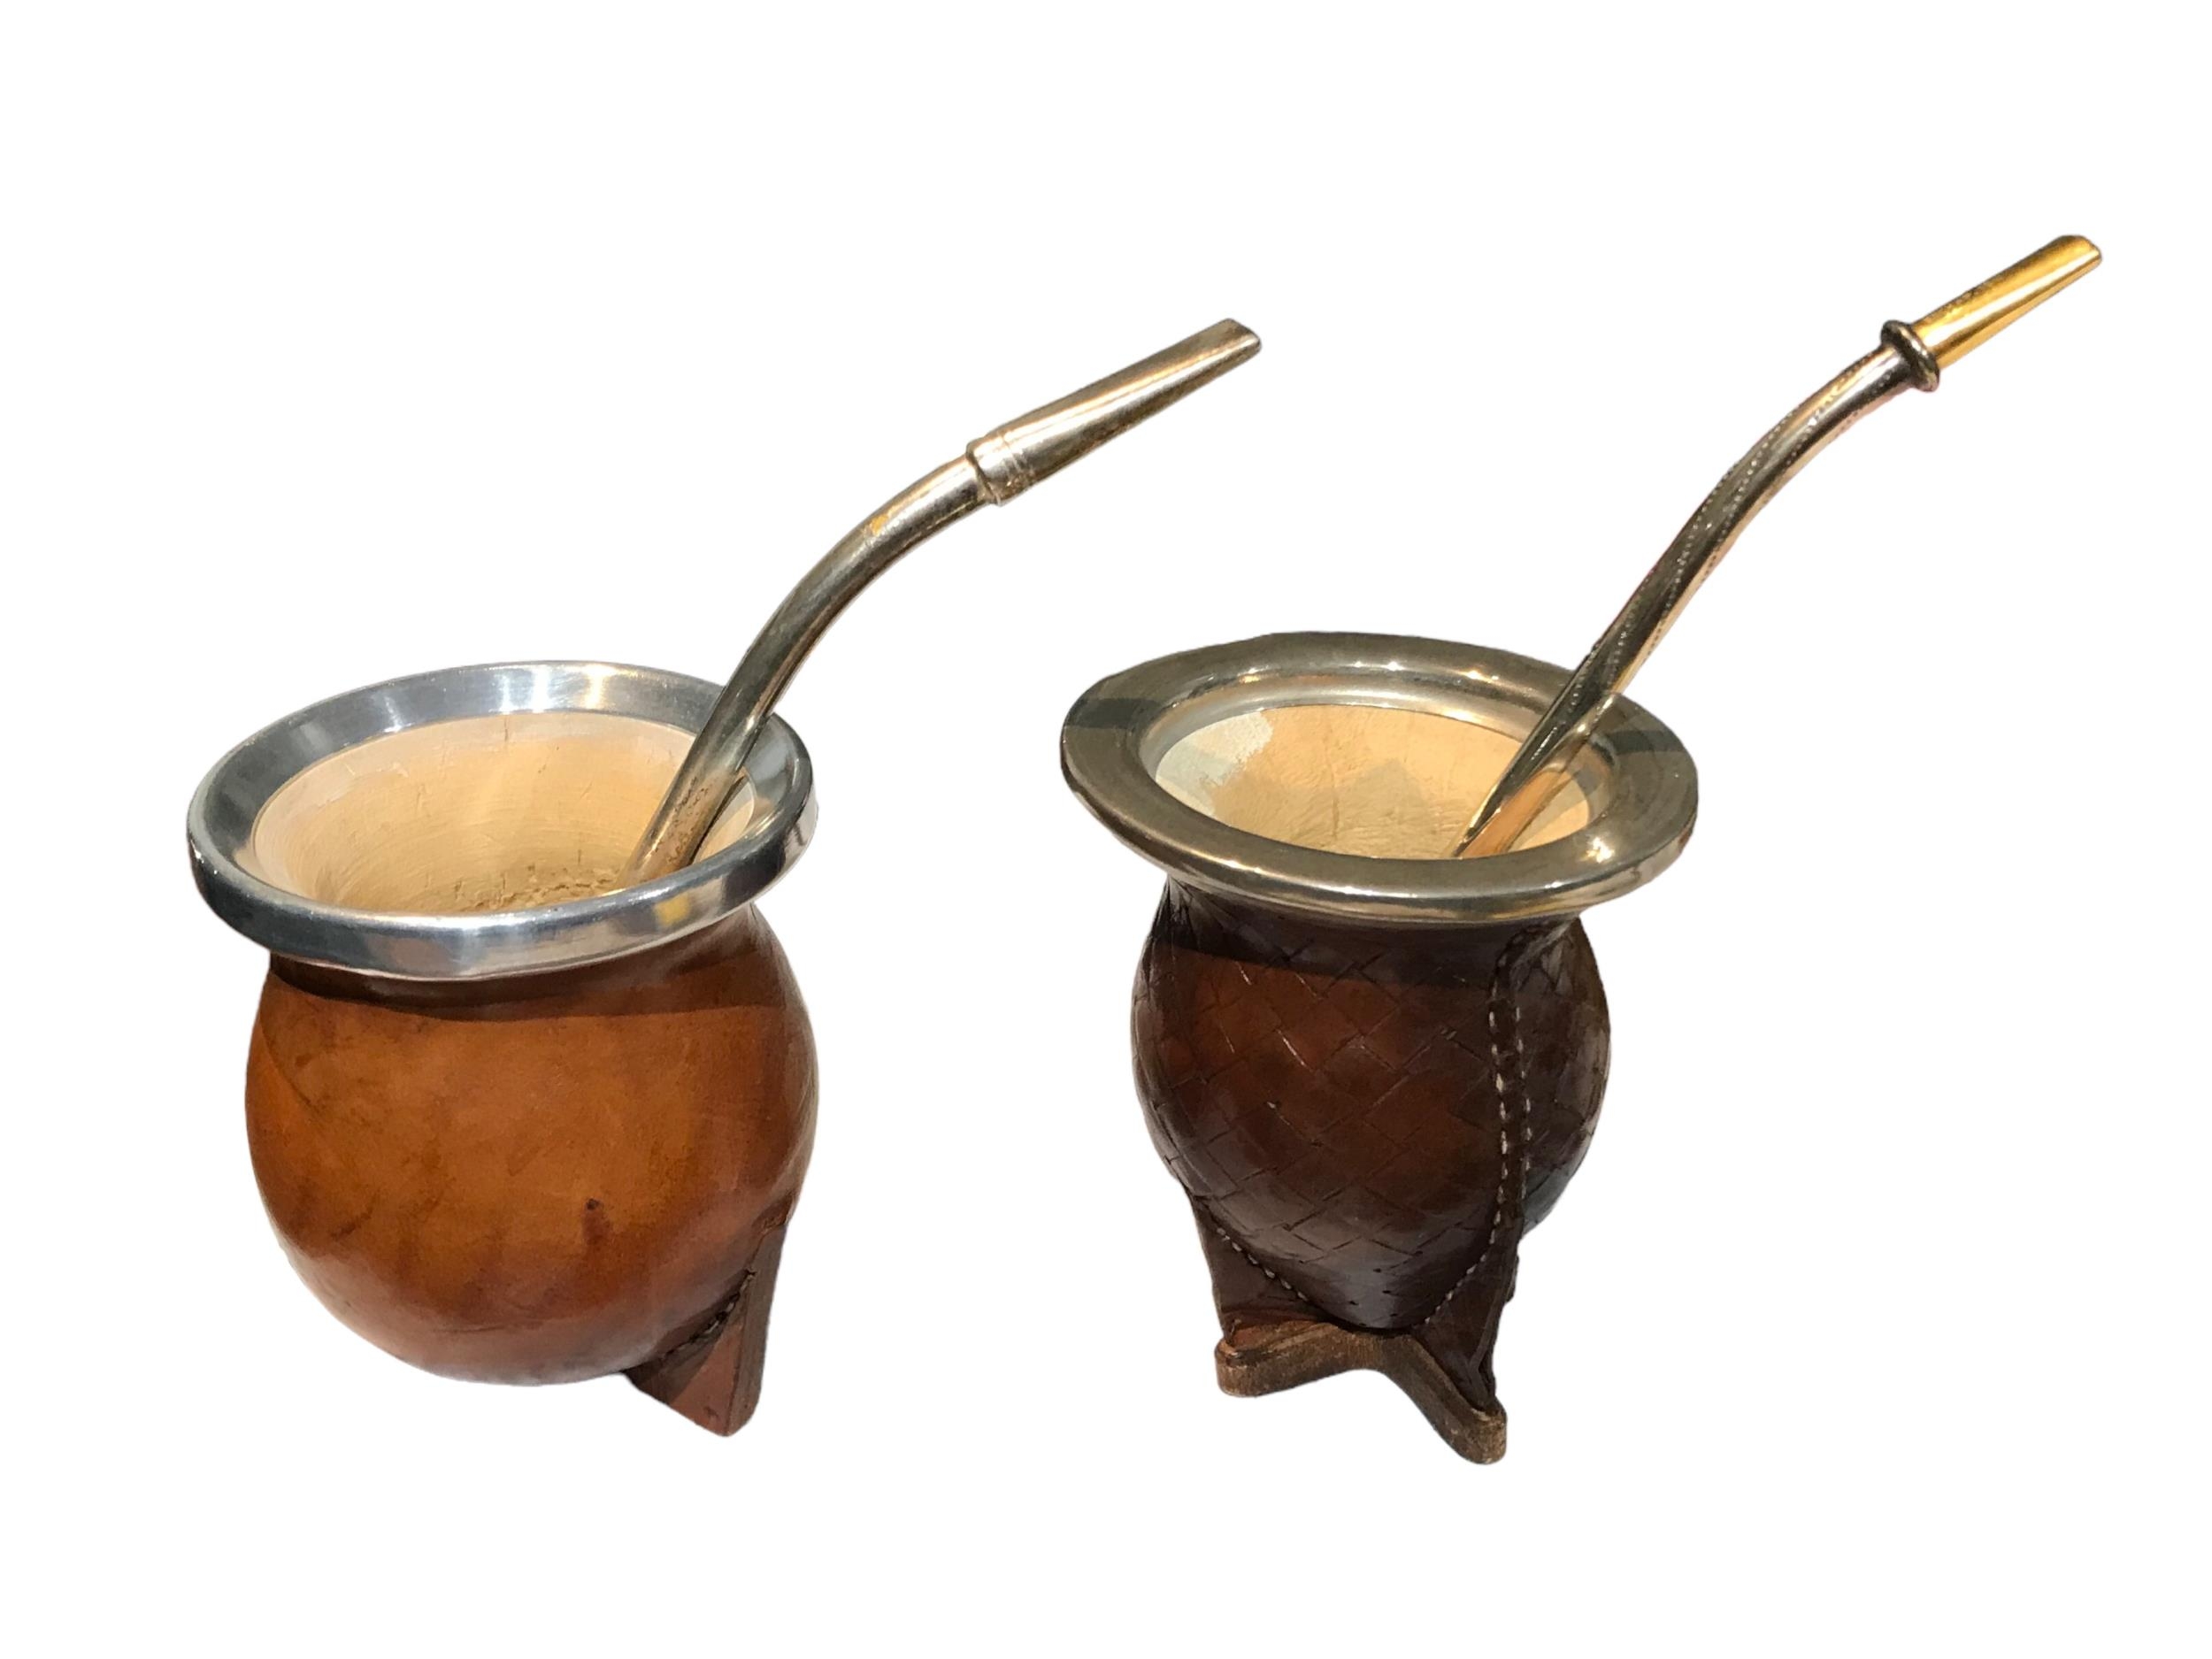 TWO 20TH CENTURY ARGENTINIAN YERBA MATES ON HAVING 18CT GOLD ENCHAP STRAW TIP. (largest h 10.3cm x